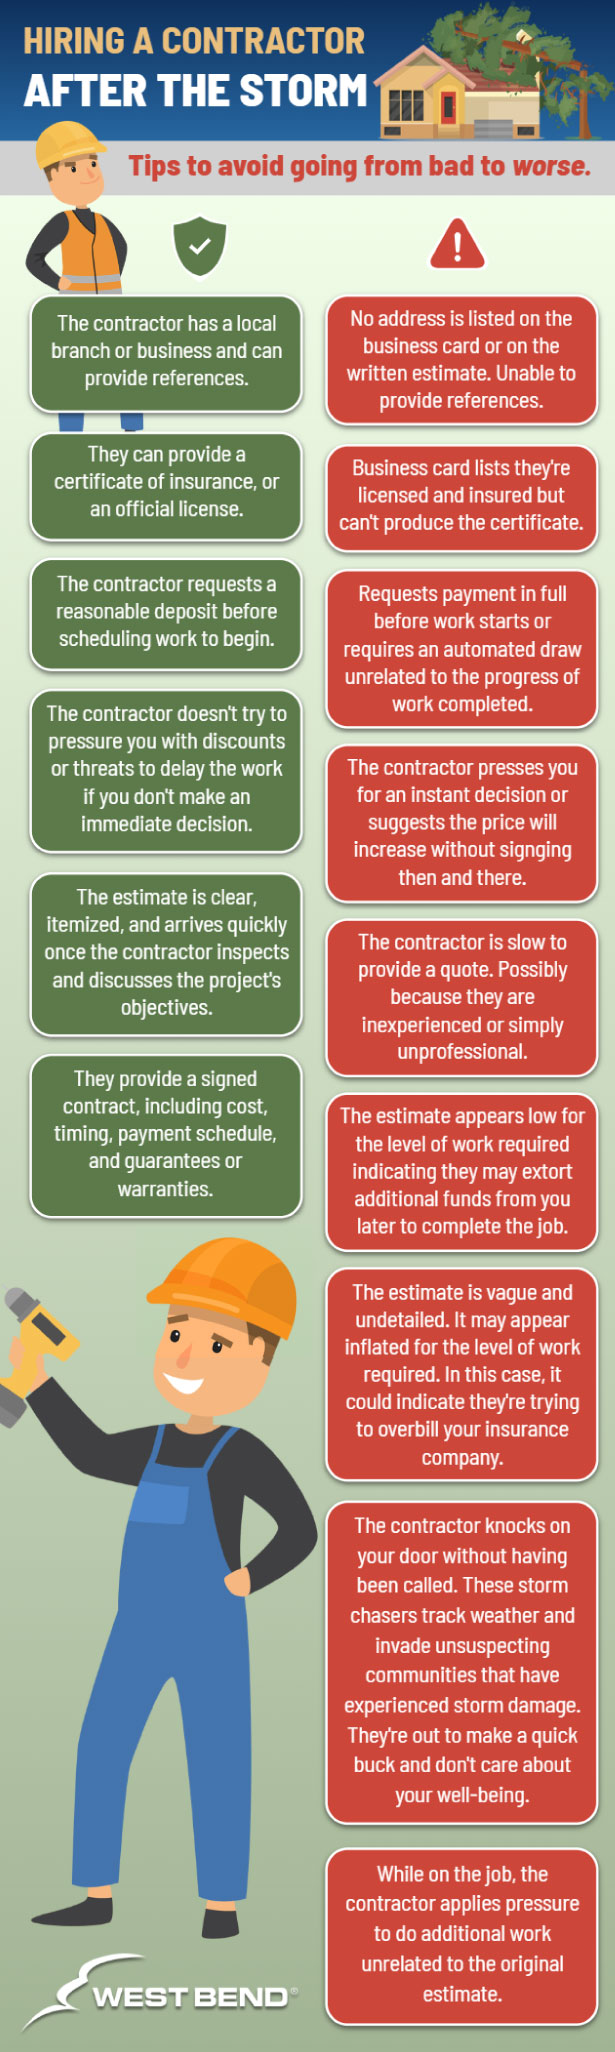 Hiring a reputable contractor guide